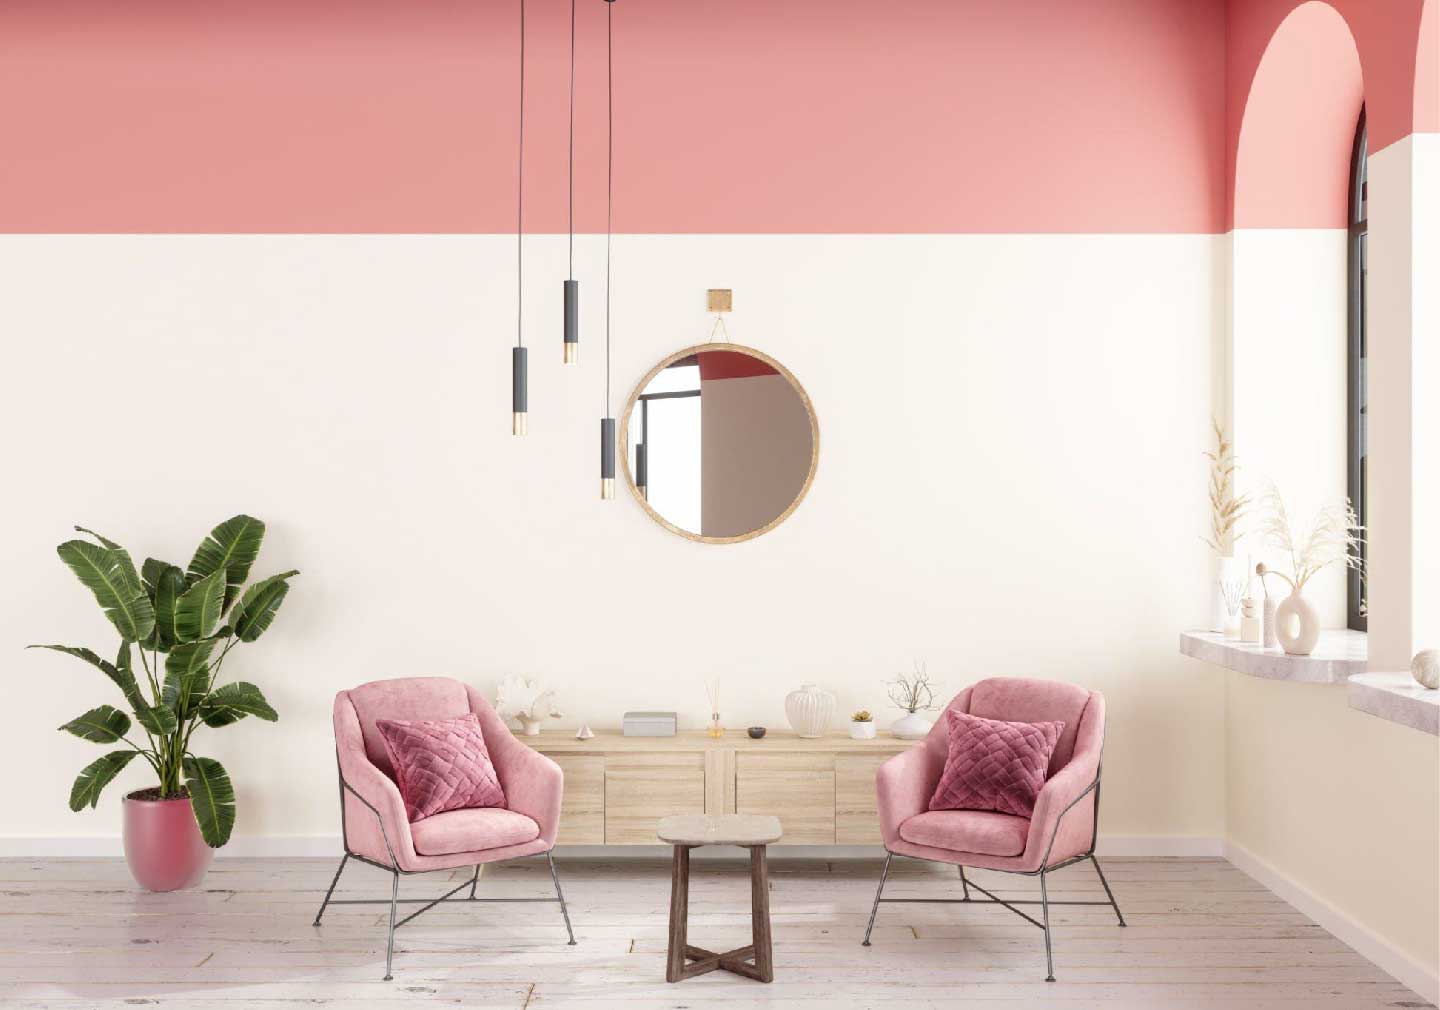 Importance of pastels in contemporary designs